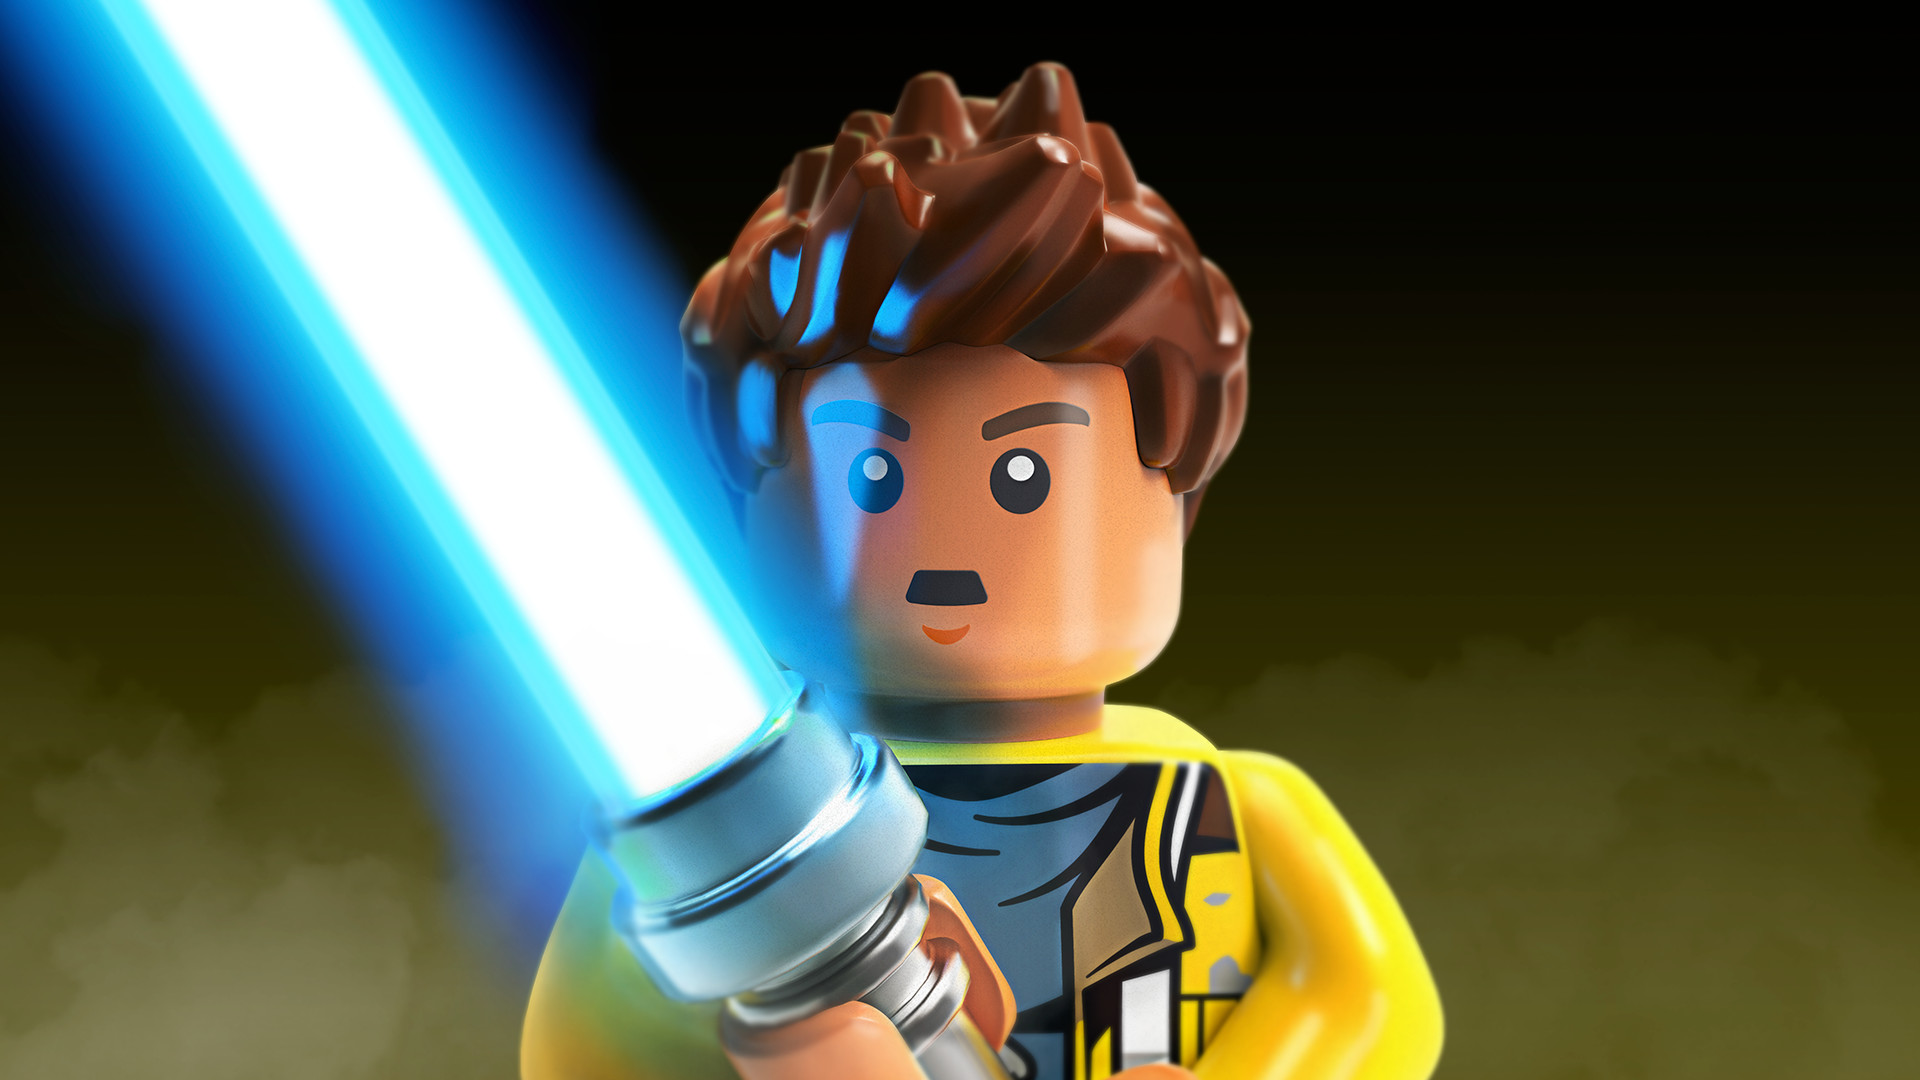 LEGO Star Wars: The Force Awakens - The Freemaker Adventures Character Pack DLC Steam CD Key 1.68$